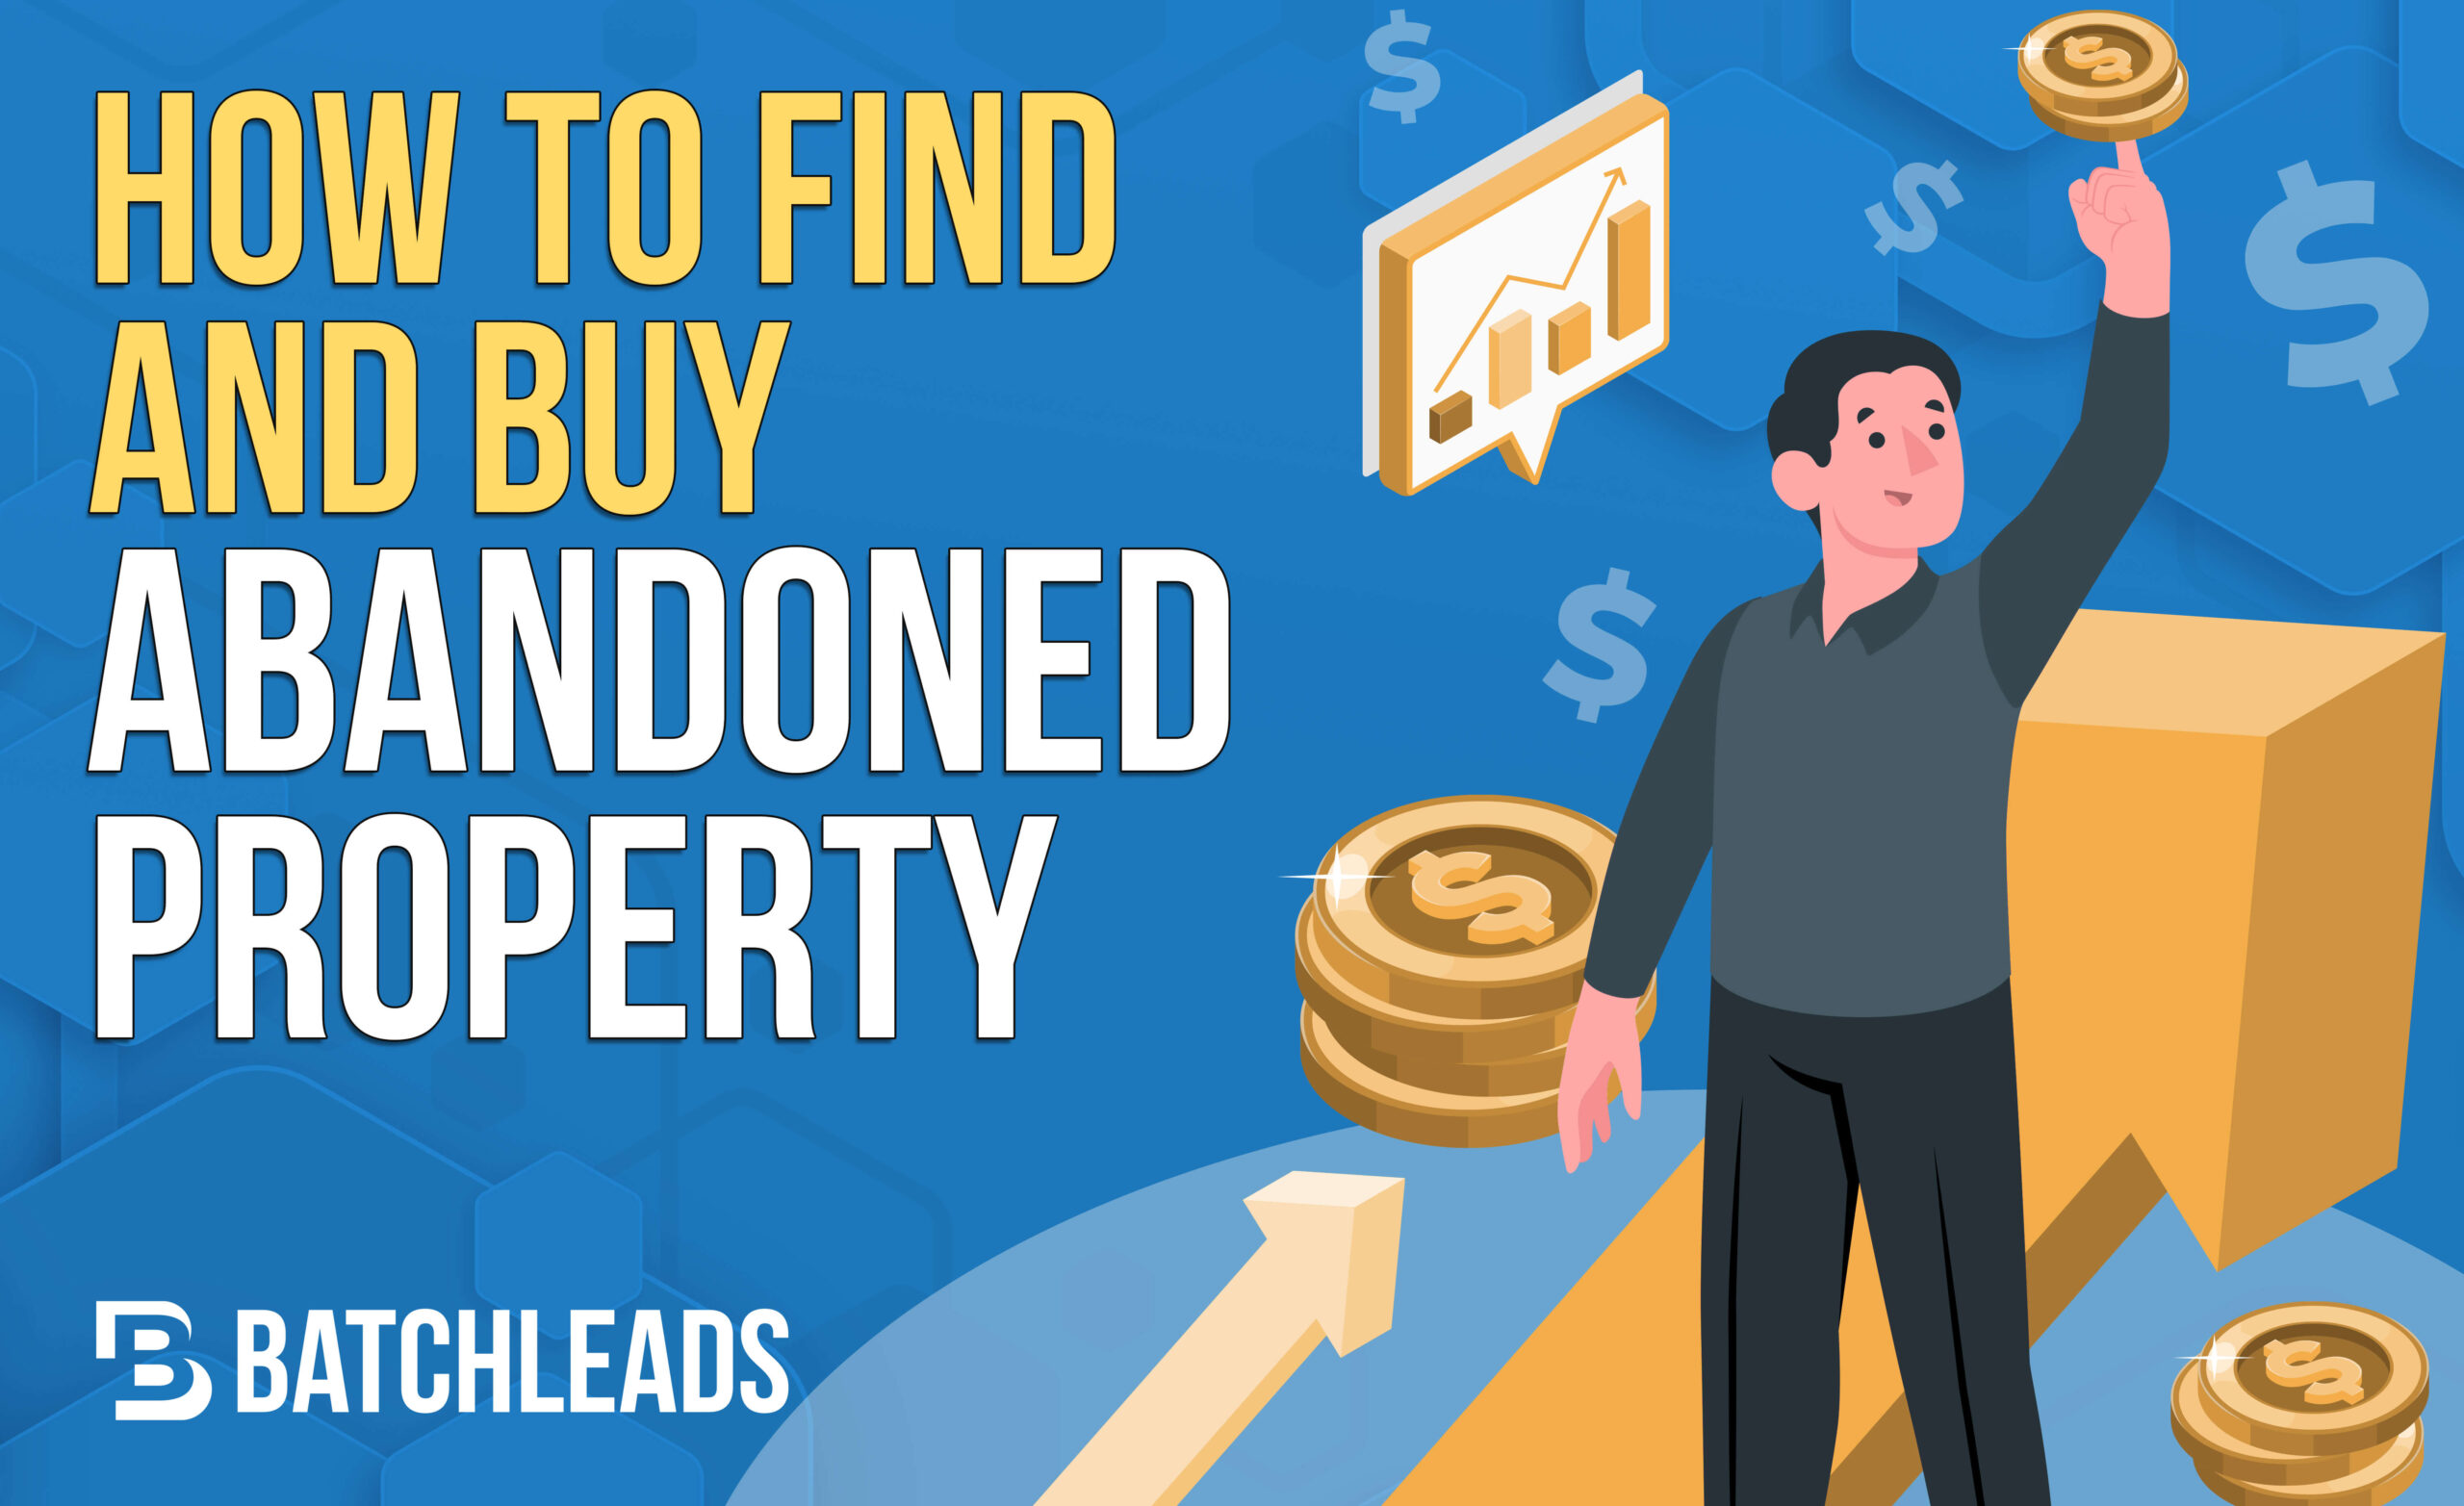 How to Find and Buy Abandoned Property